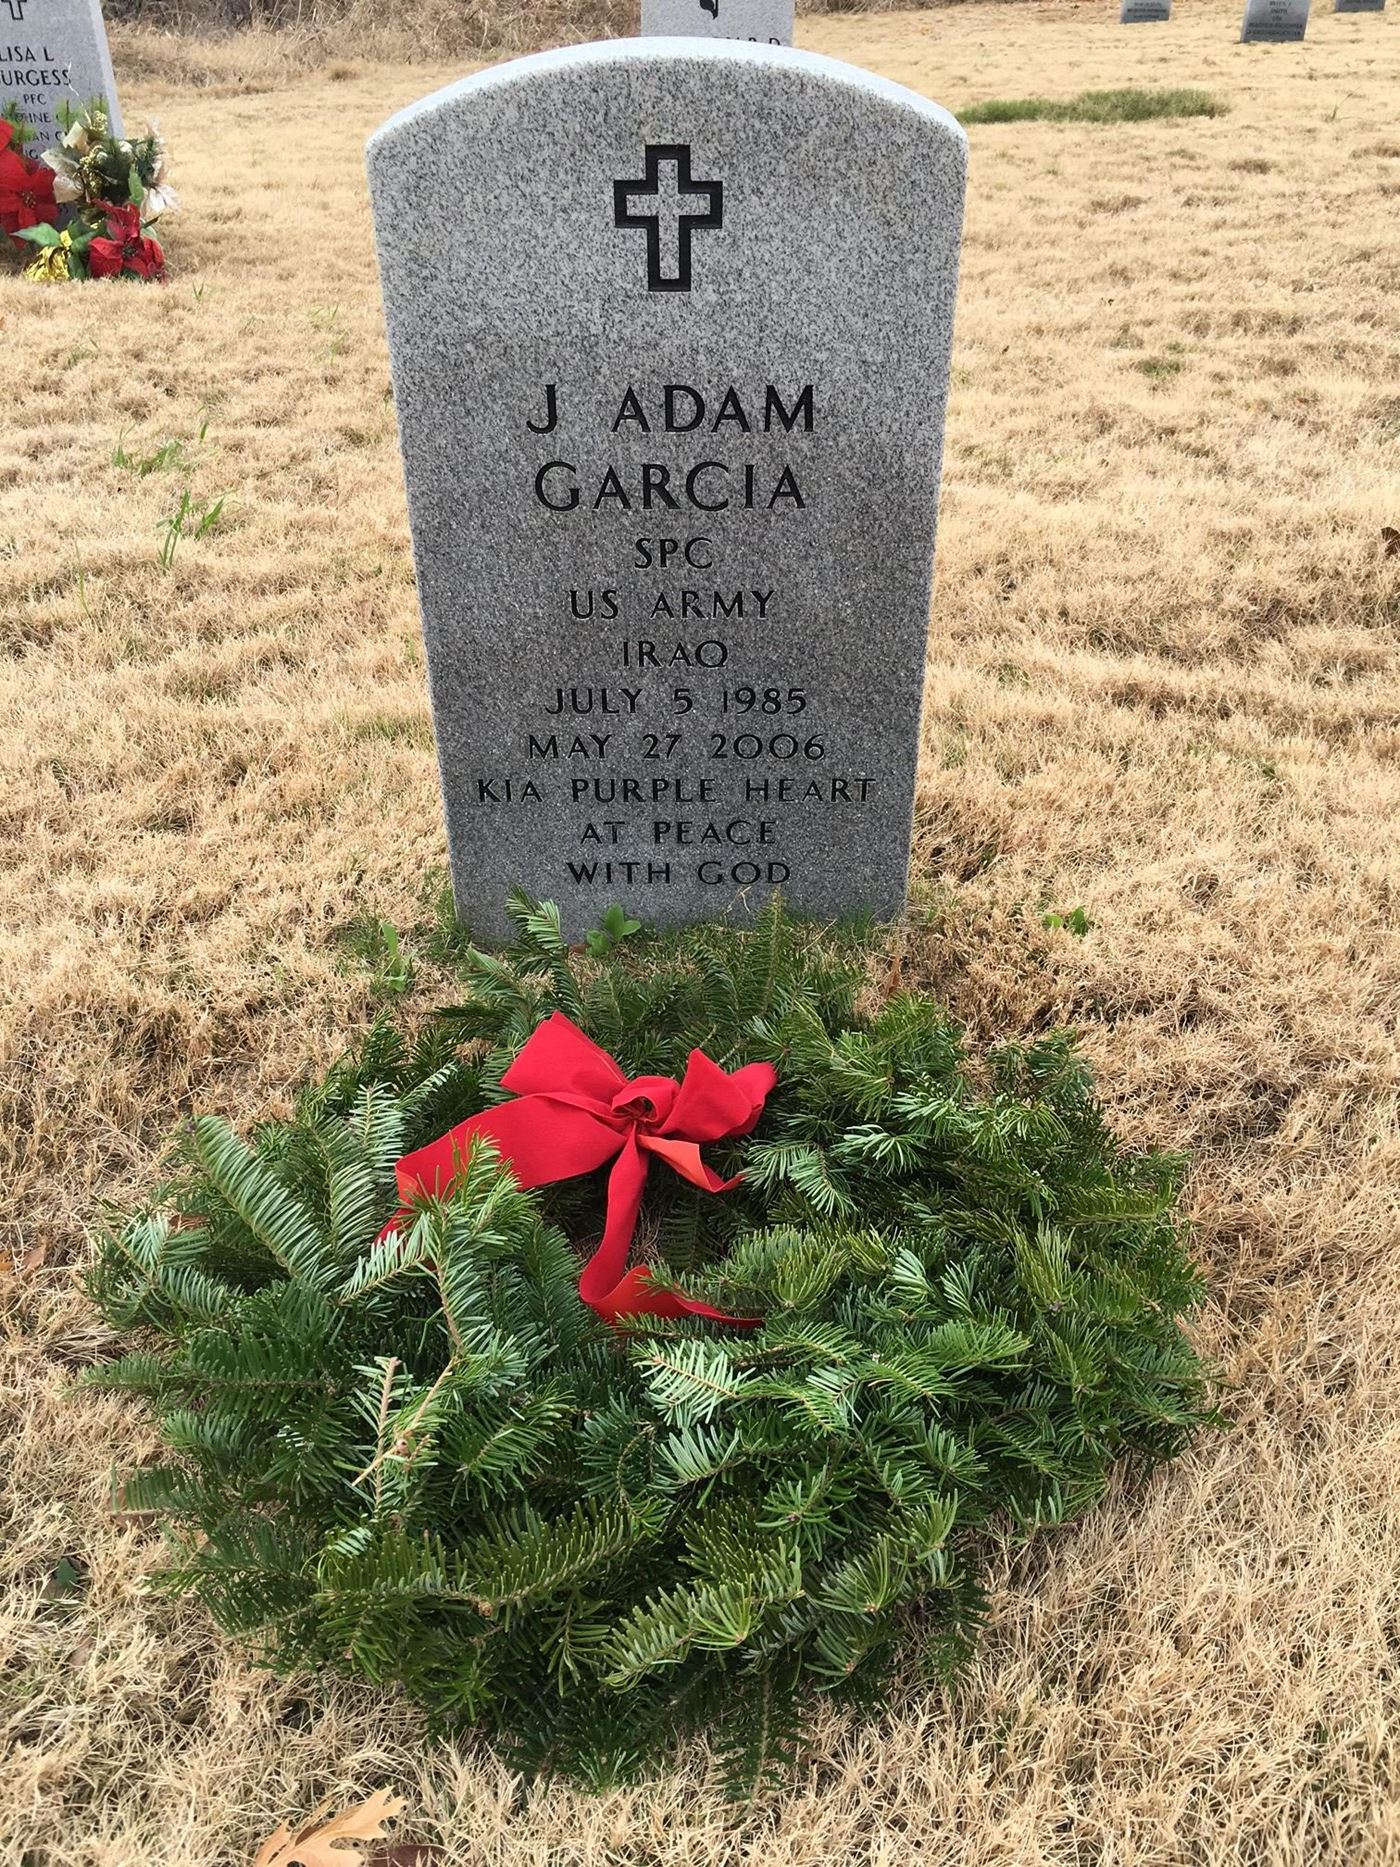 The grave of Adam Garcia, mortally wounded in Iraq. His mother Cynthia Garcia is a member of NBC 5/Telemundo 39 Veteran's Network.